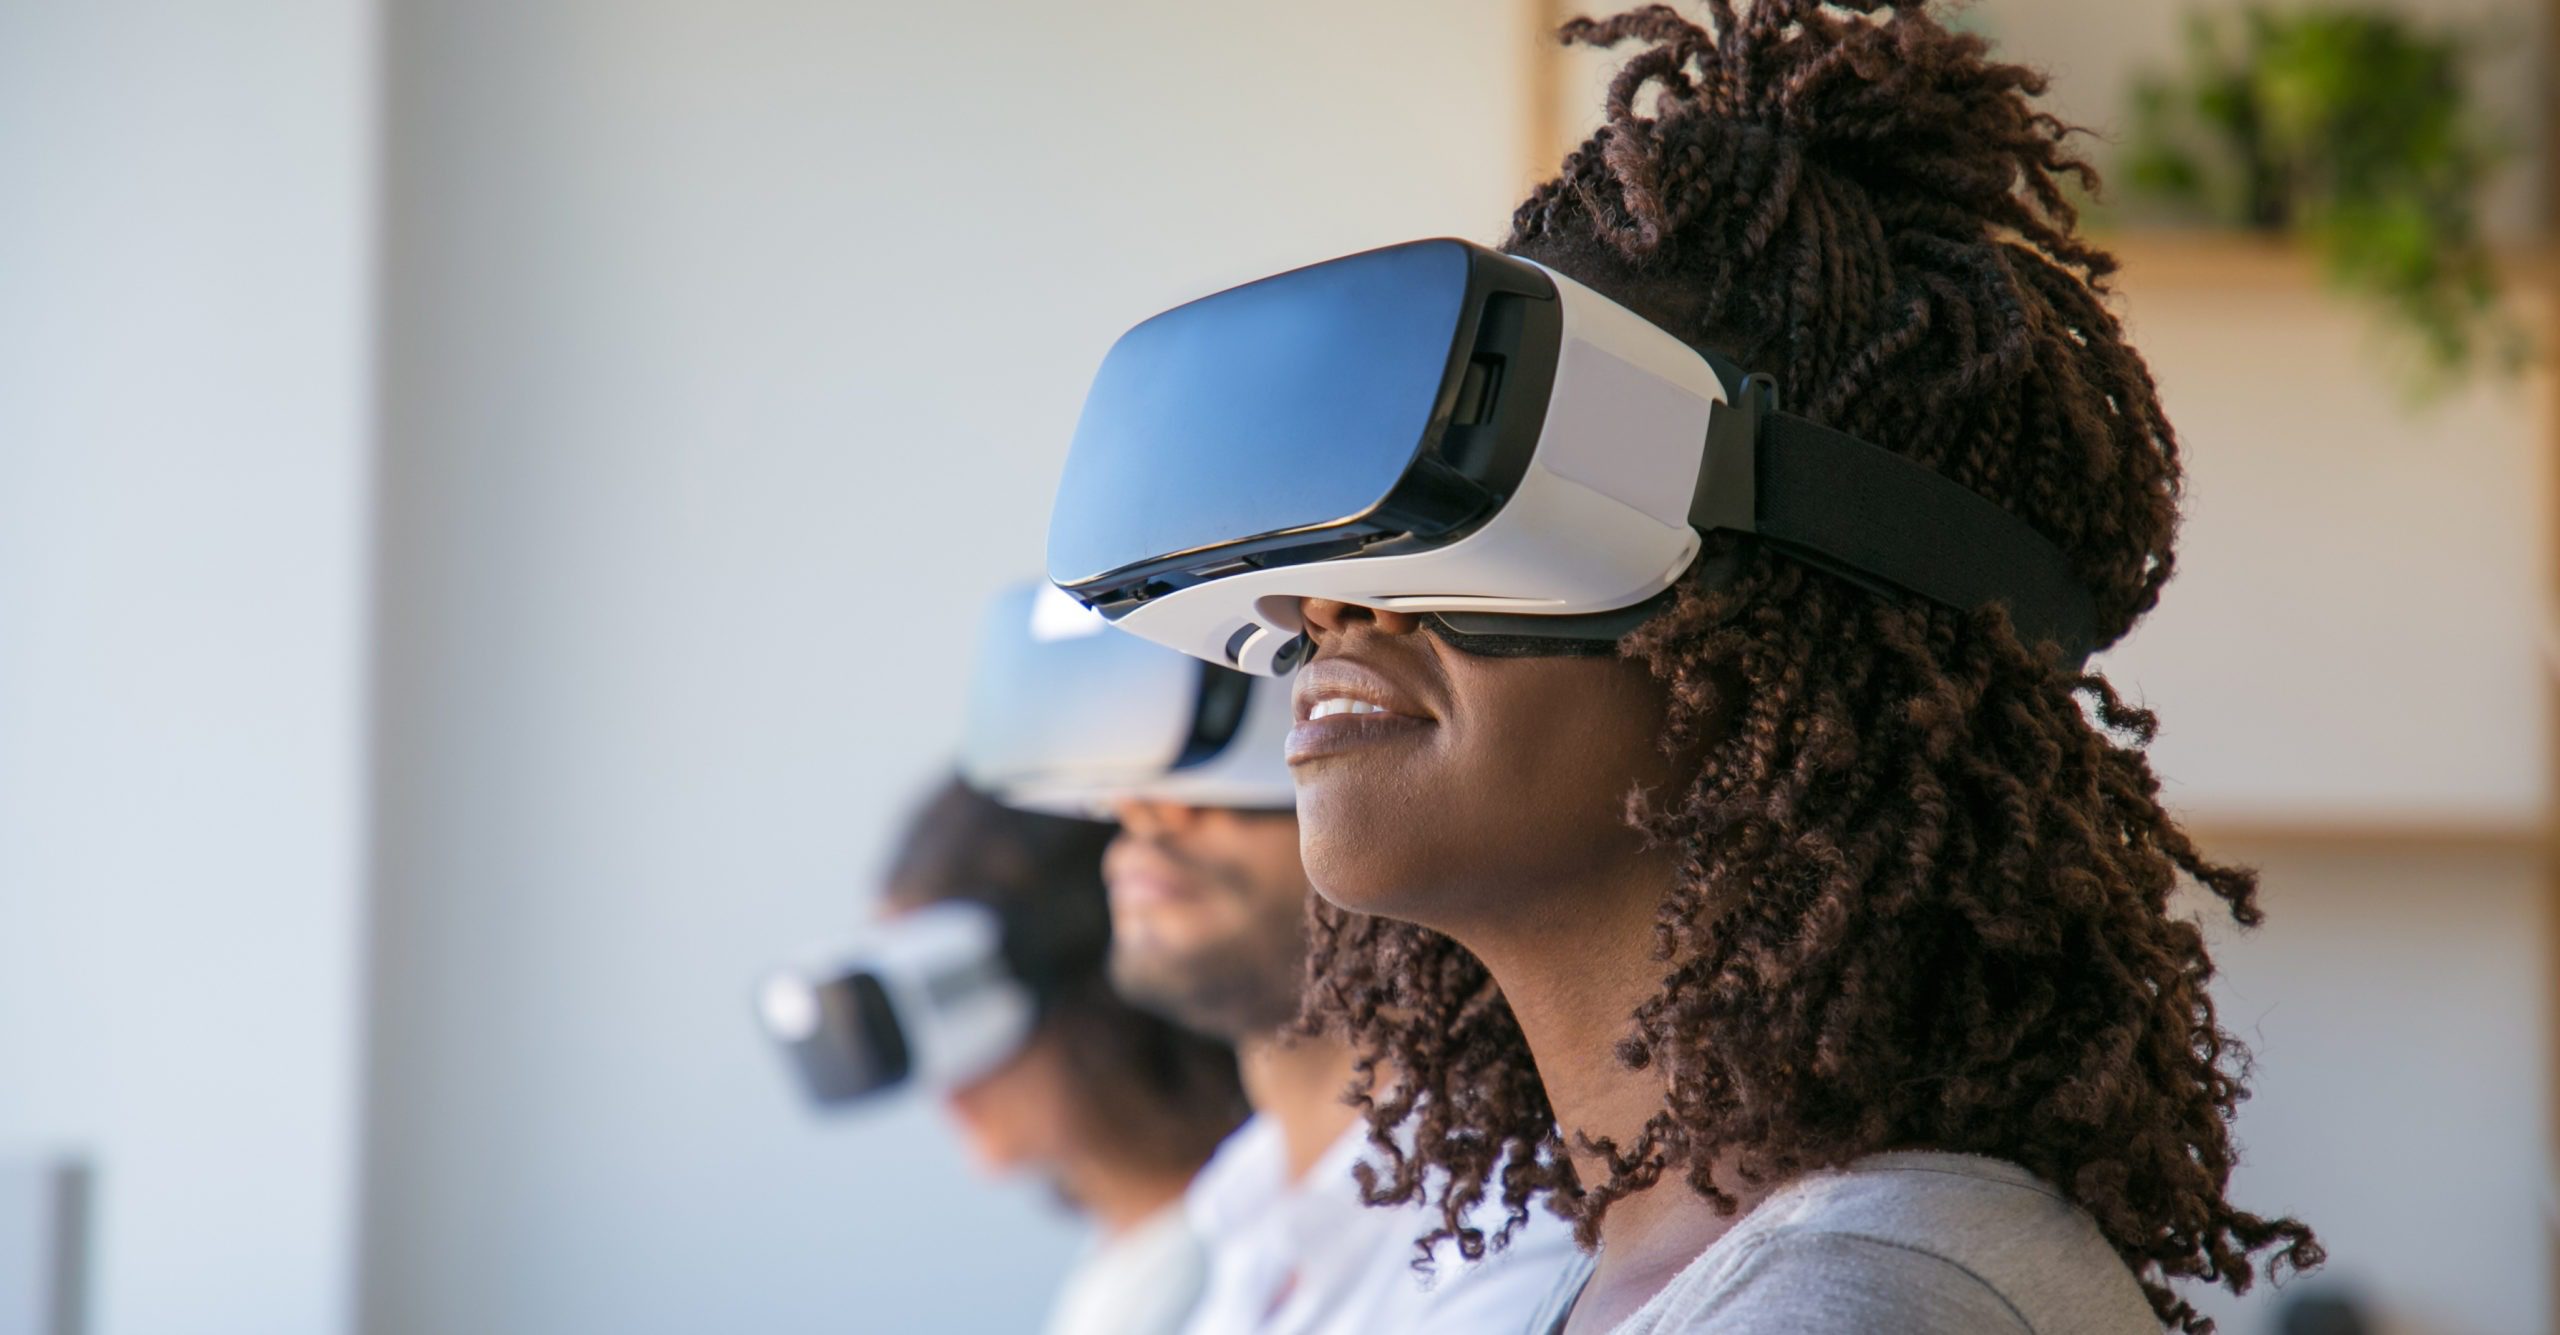 Virtual Reality as an Agile Research Testing Solution